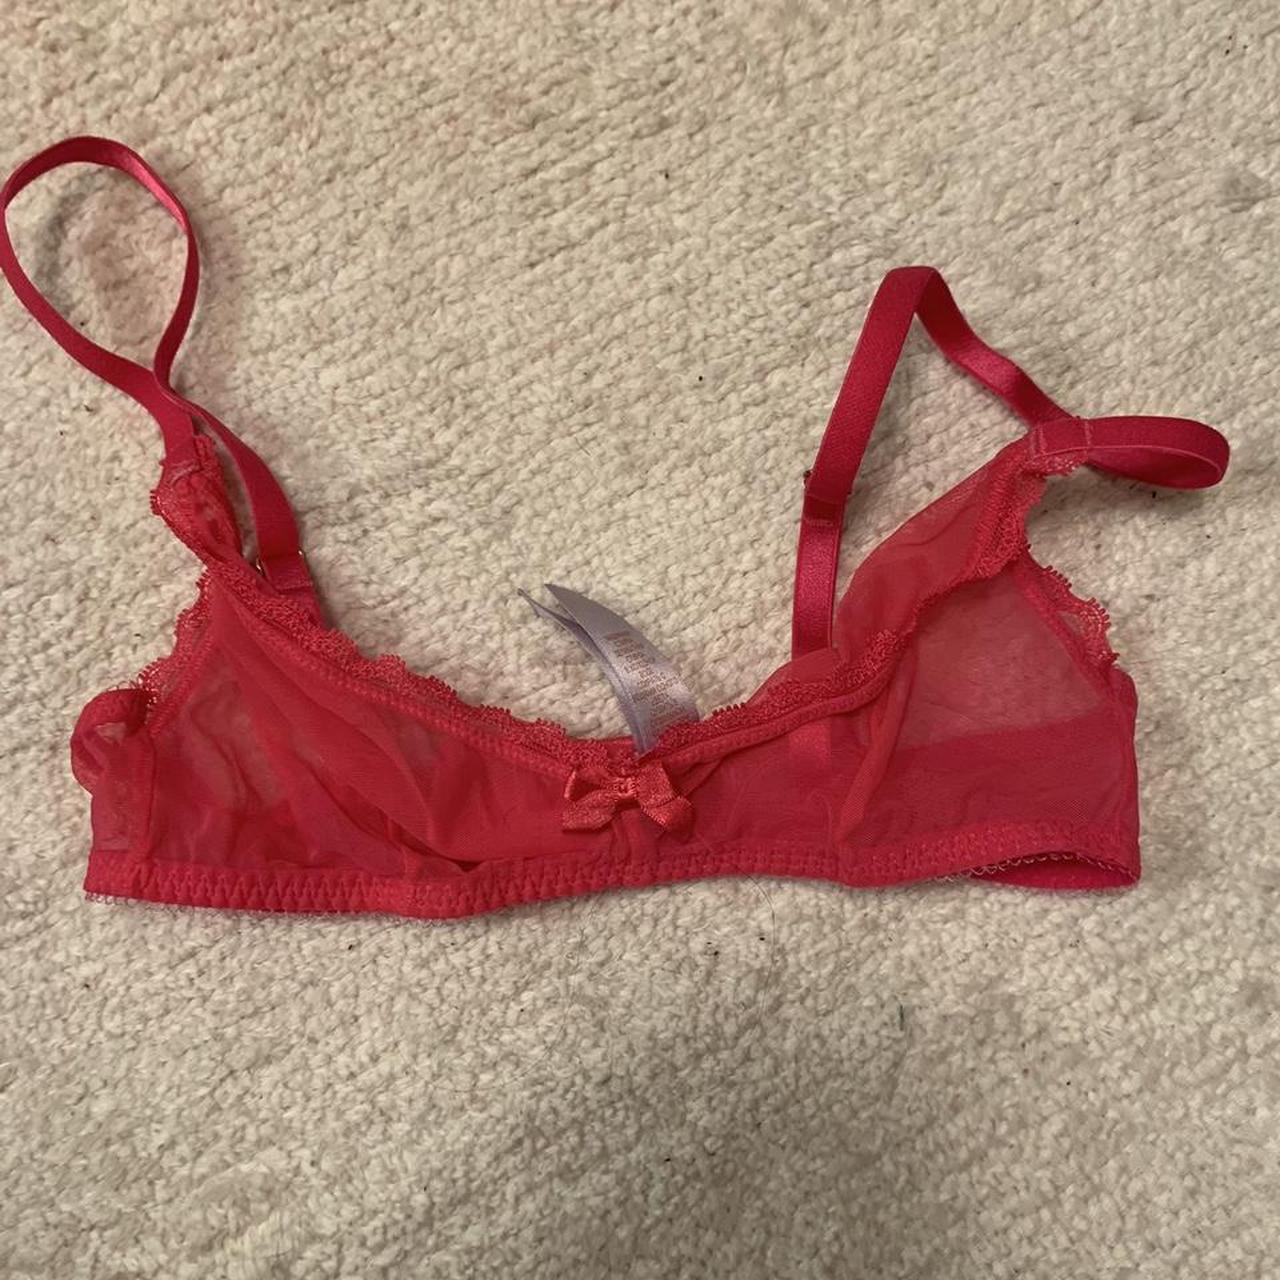 Hot pink lace bralette from savage x fenty. Fits a - Depop